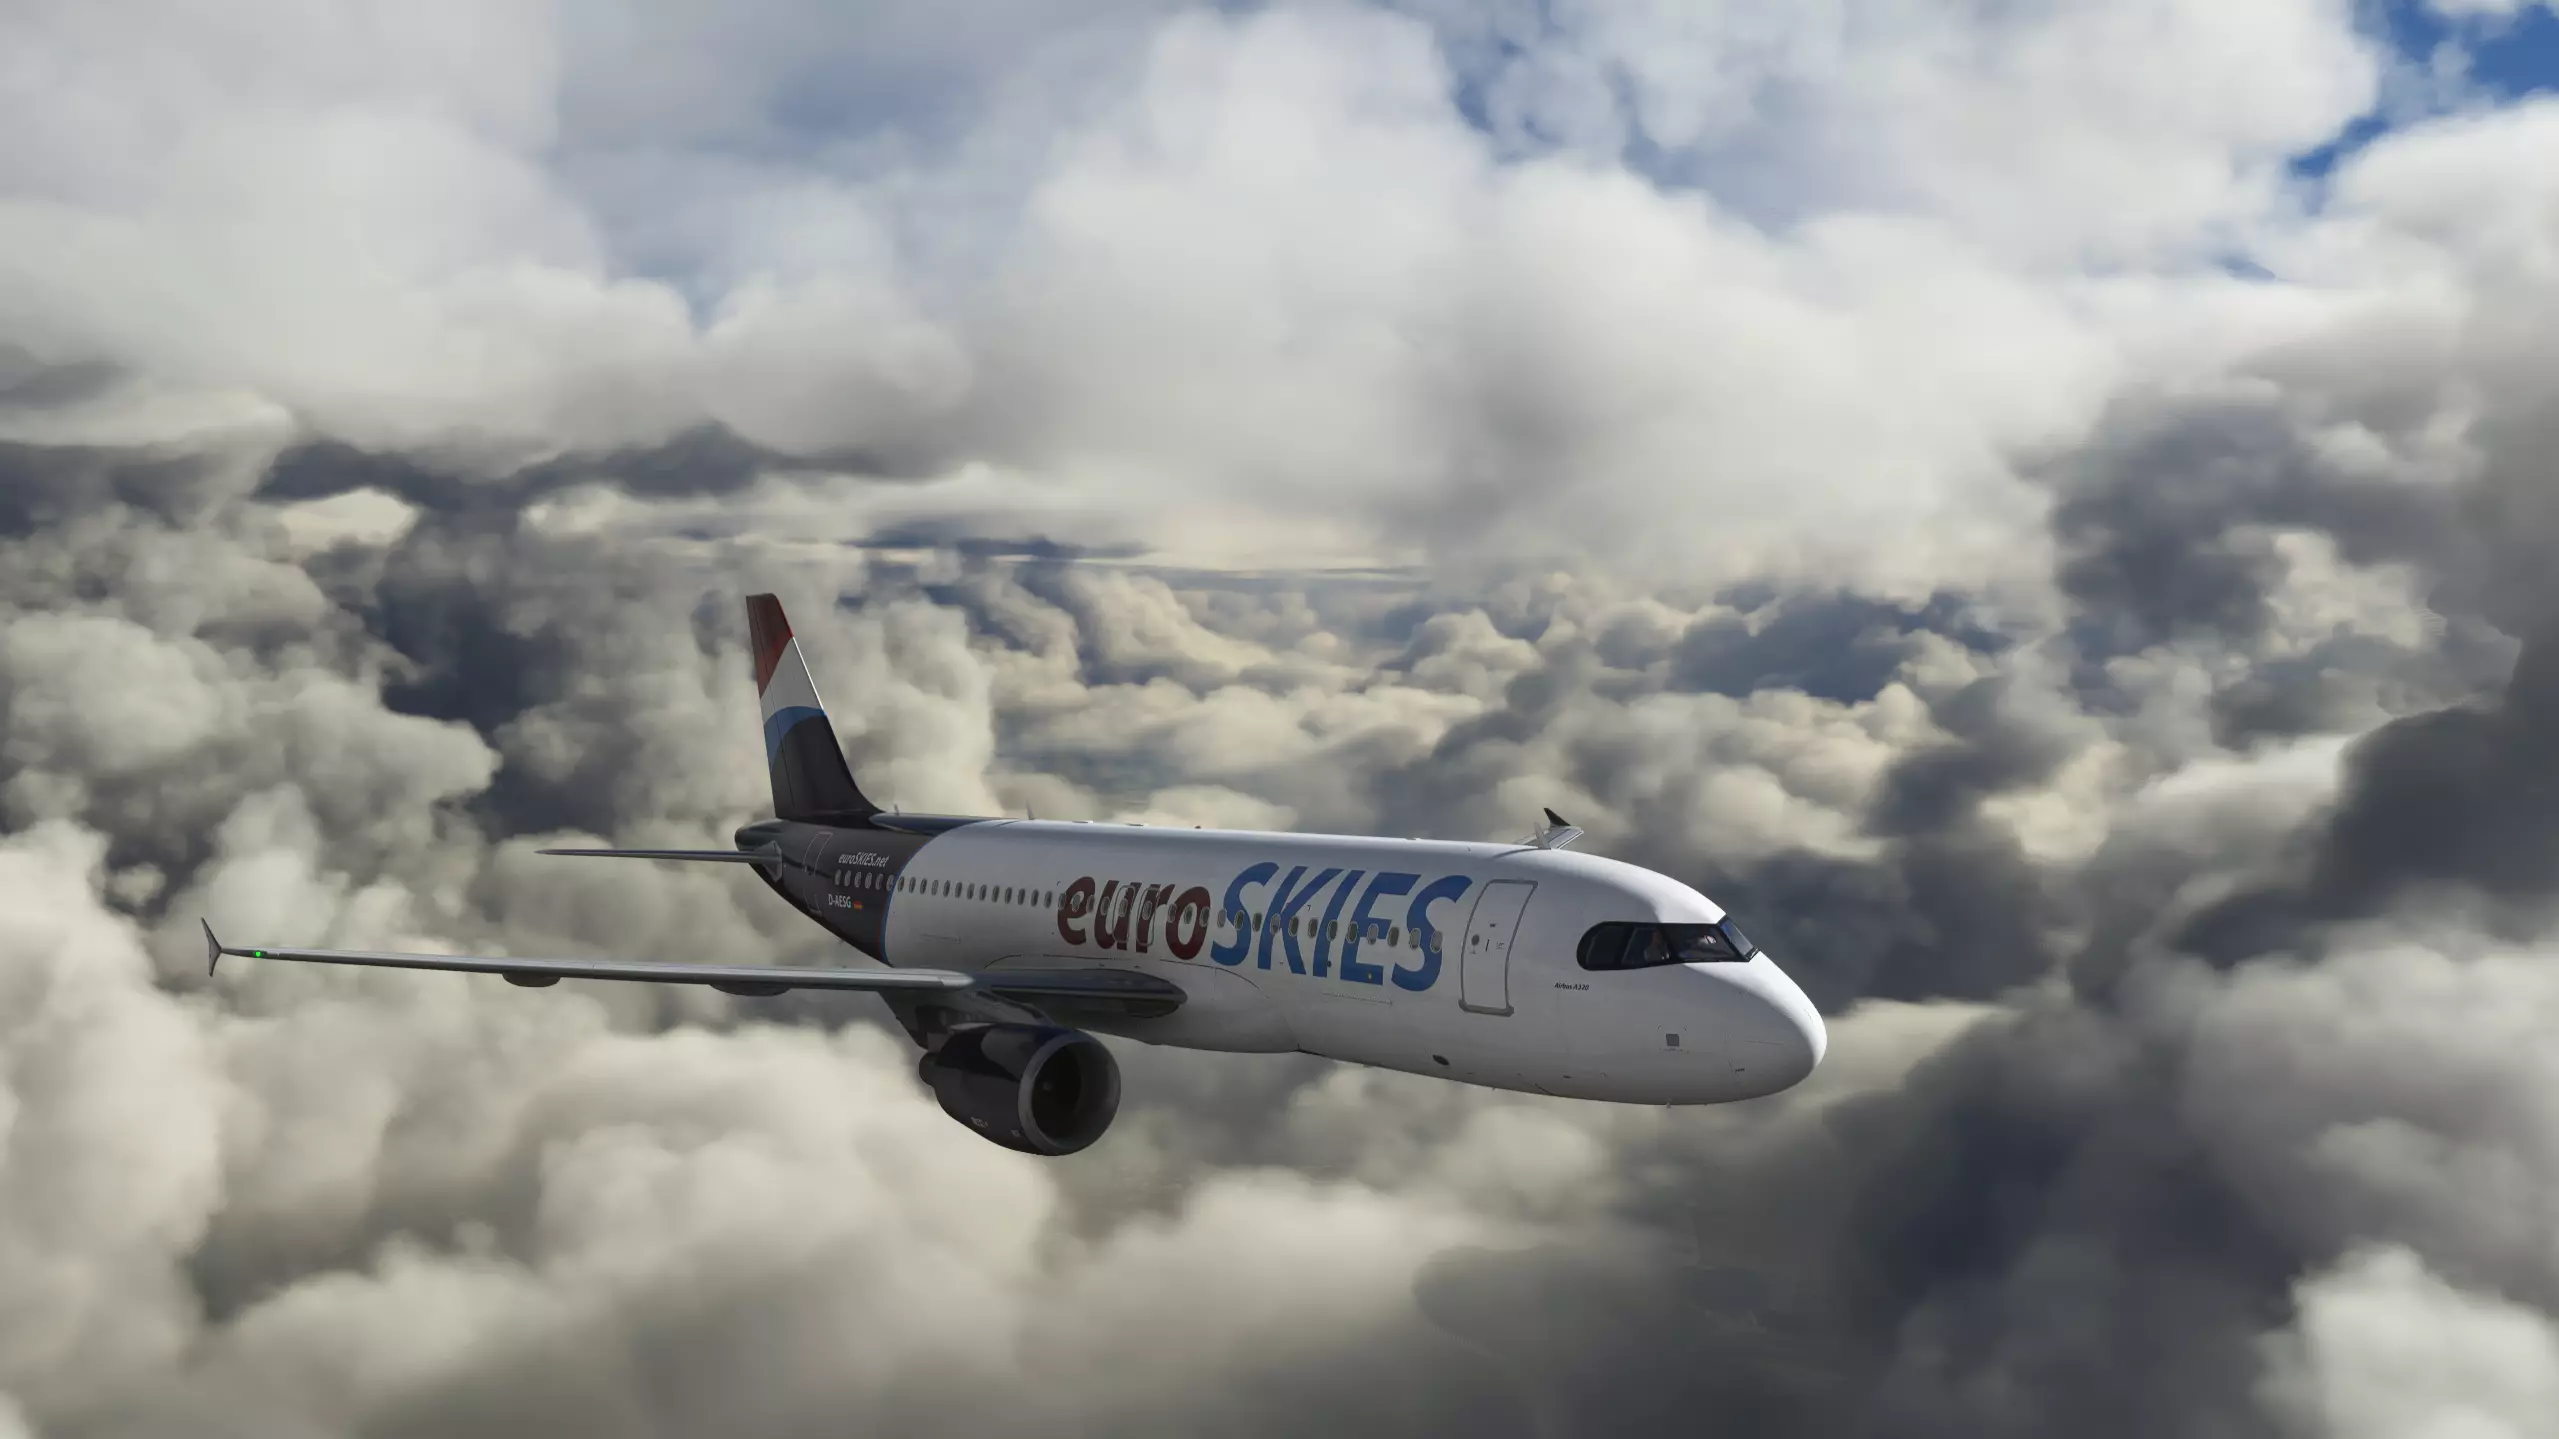 euroSKIES virtual airline A320 flying through clouds